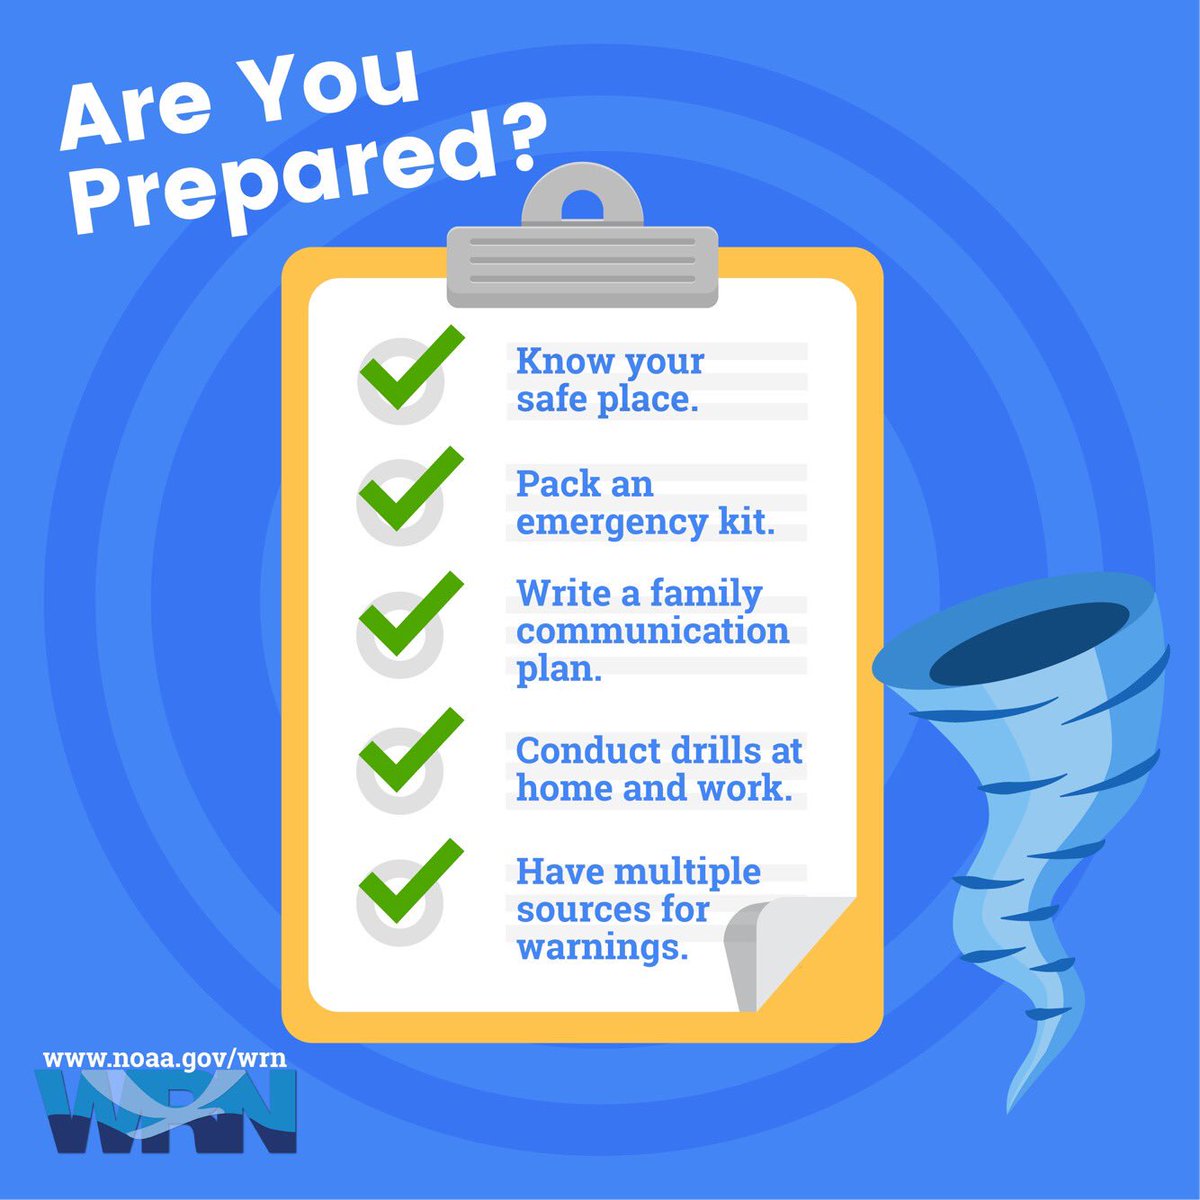 The weather is quiet for now, but Spring is in full swing. So, it's a great time to review your safety plans for severe weather! Here's a few items to get you started. #scwx #ncwx #gawx